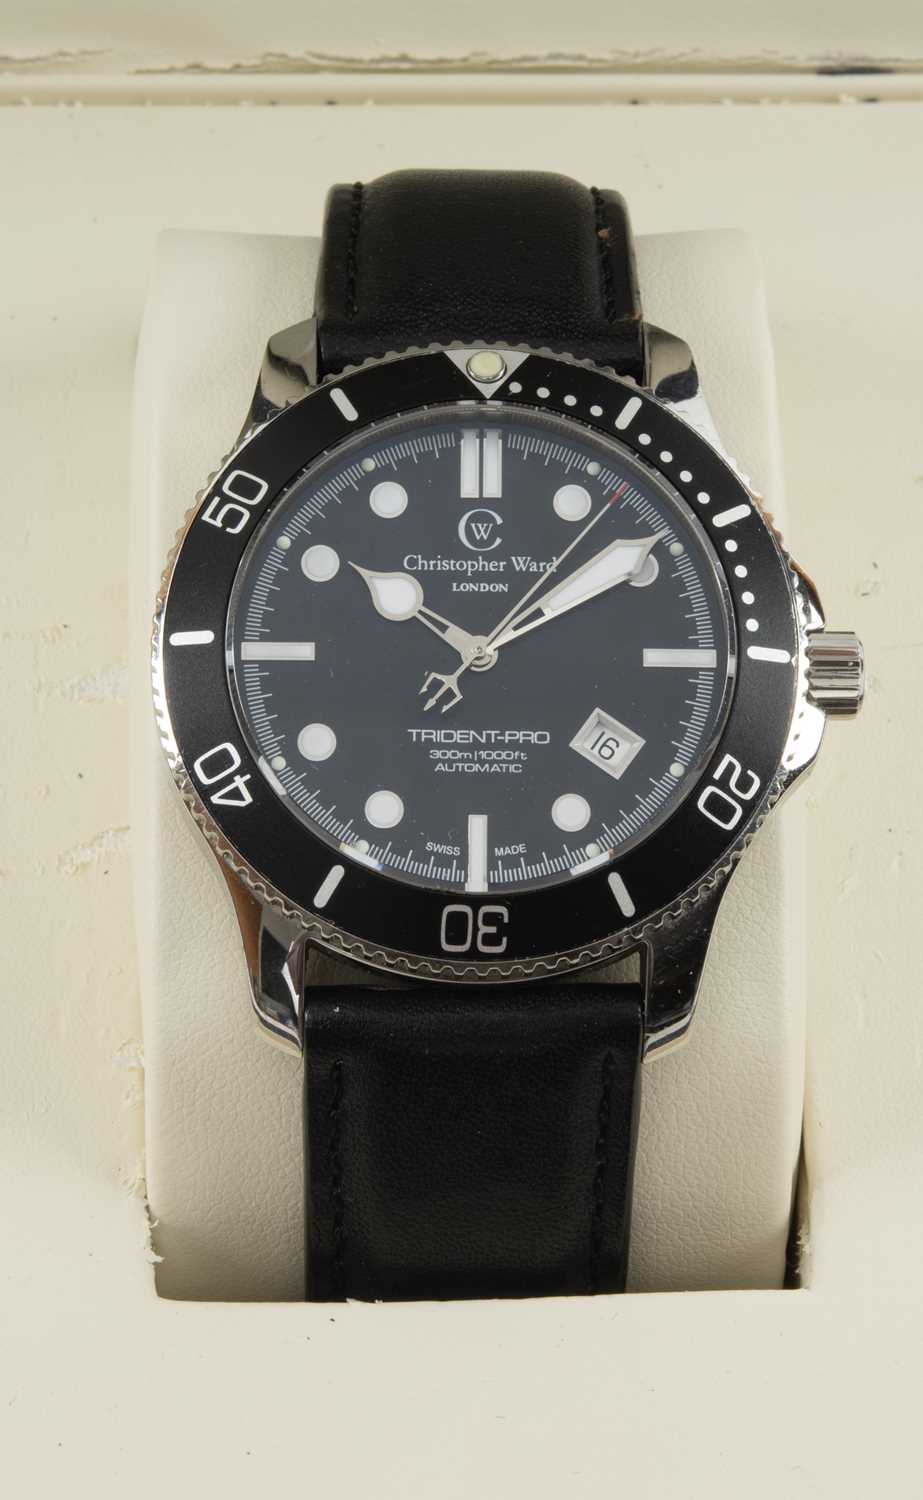 CHRISTOPHER WARD C60 TRIDENT PRO AUTOMATIC WRISTWATCH, stainless steel, the black dial with white